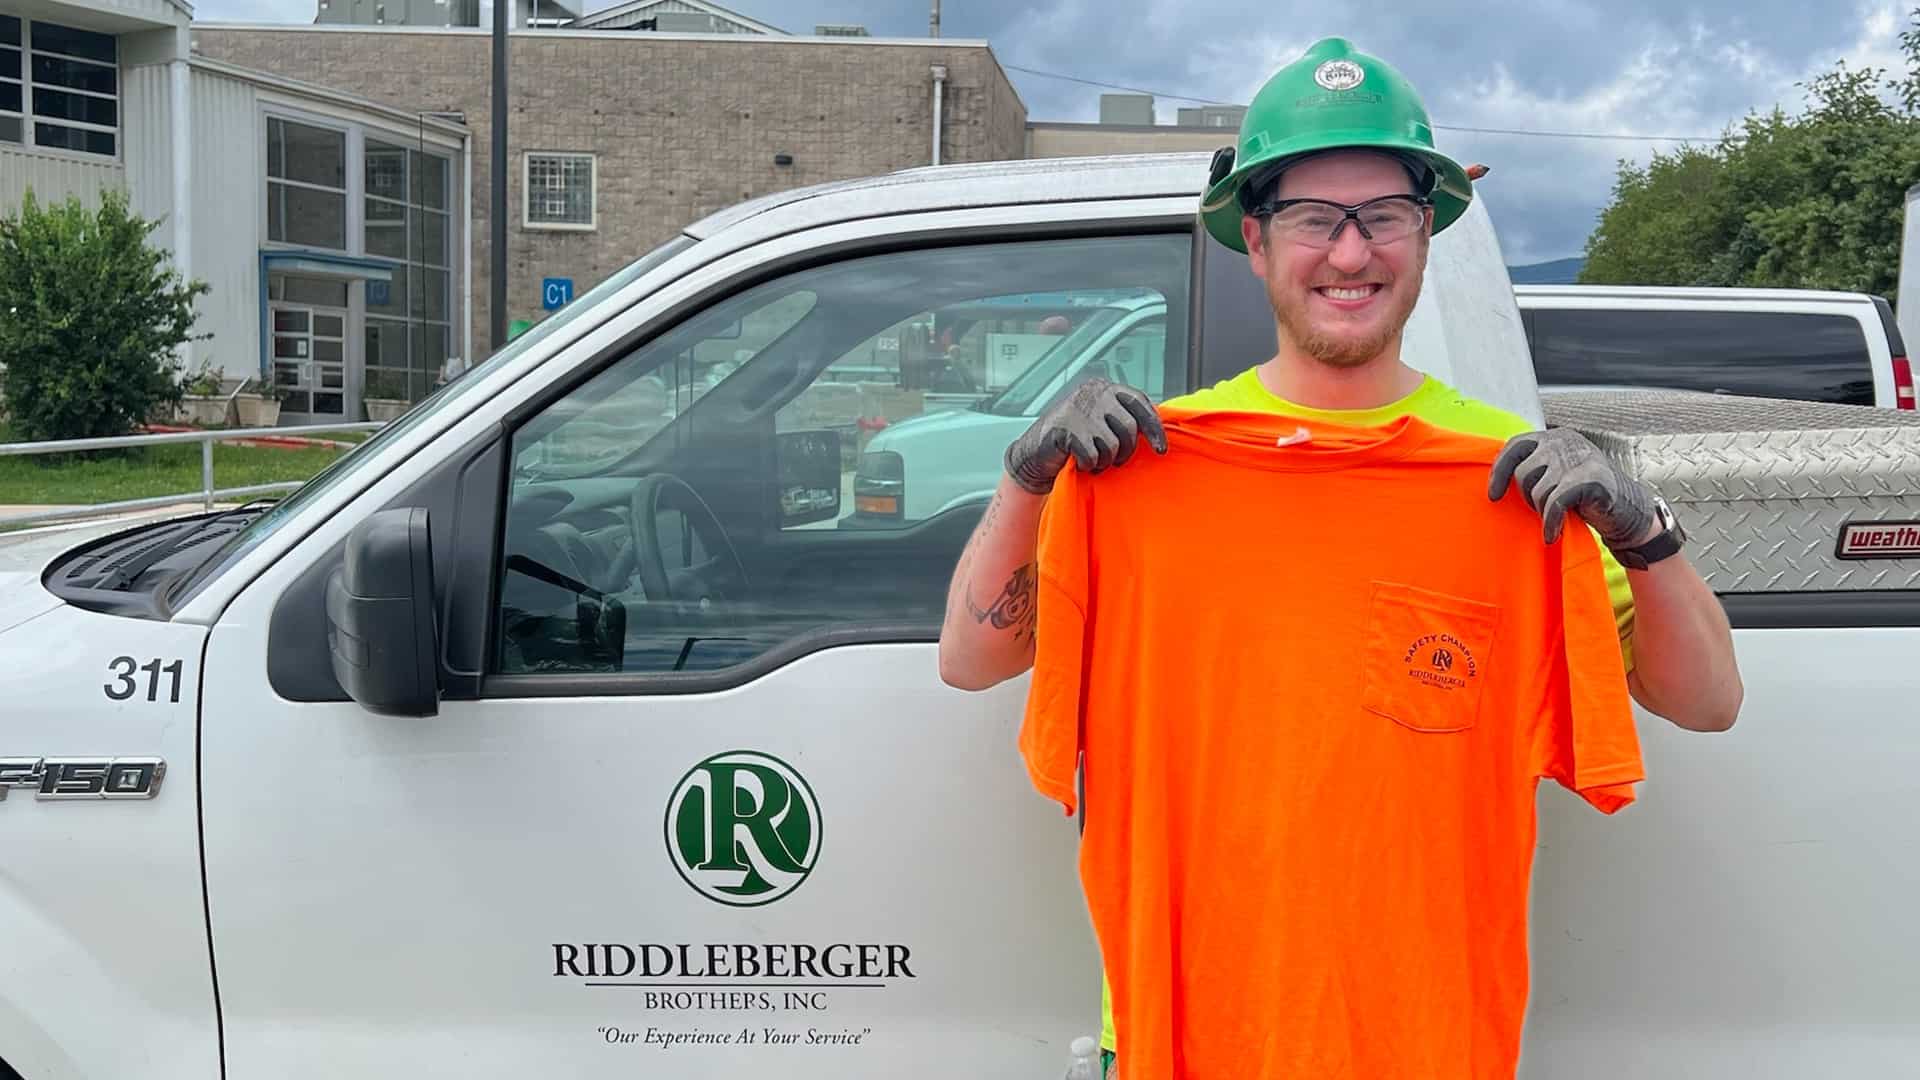 Dillon Flick standing in front of a Riddleberger Brothers truck with his safety shirt